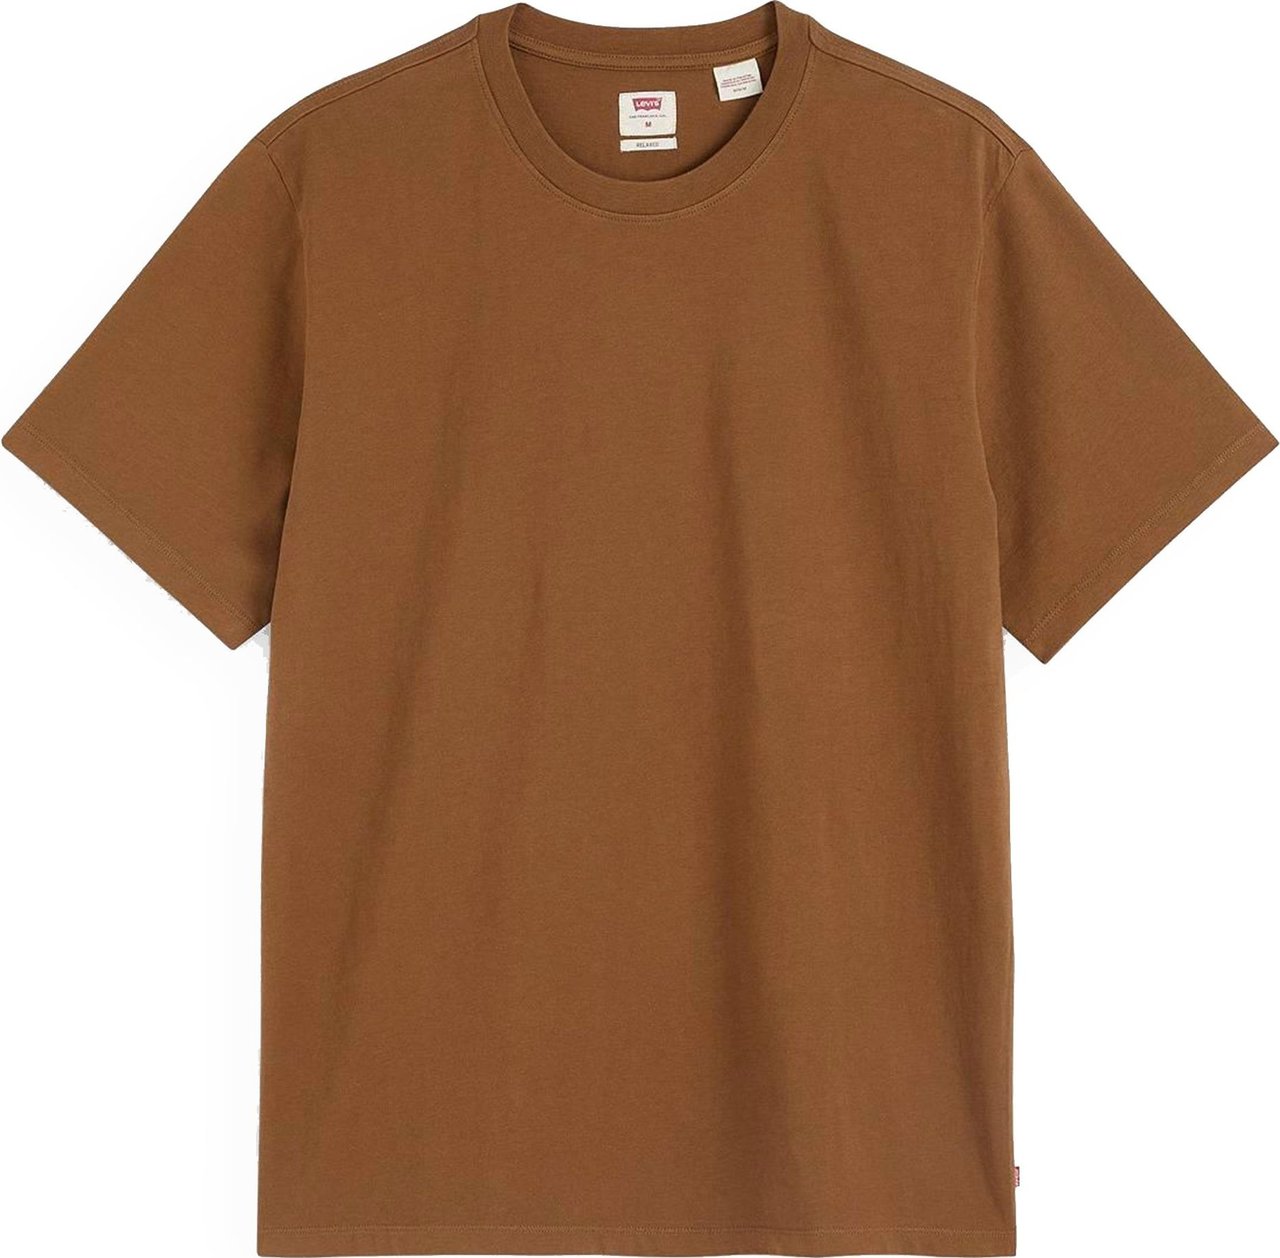 Levi's T-shirt Man Red The Essential Tee Sepia A3328-0007 Bruin